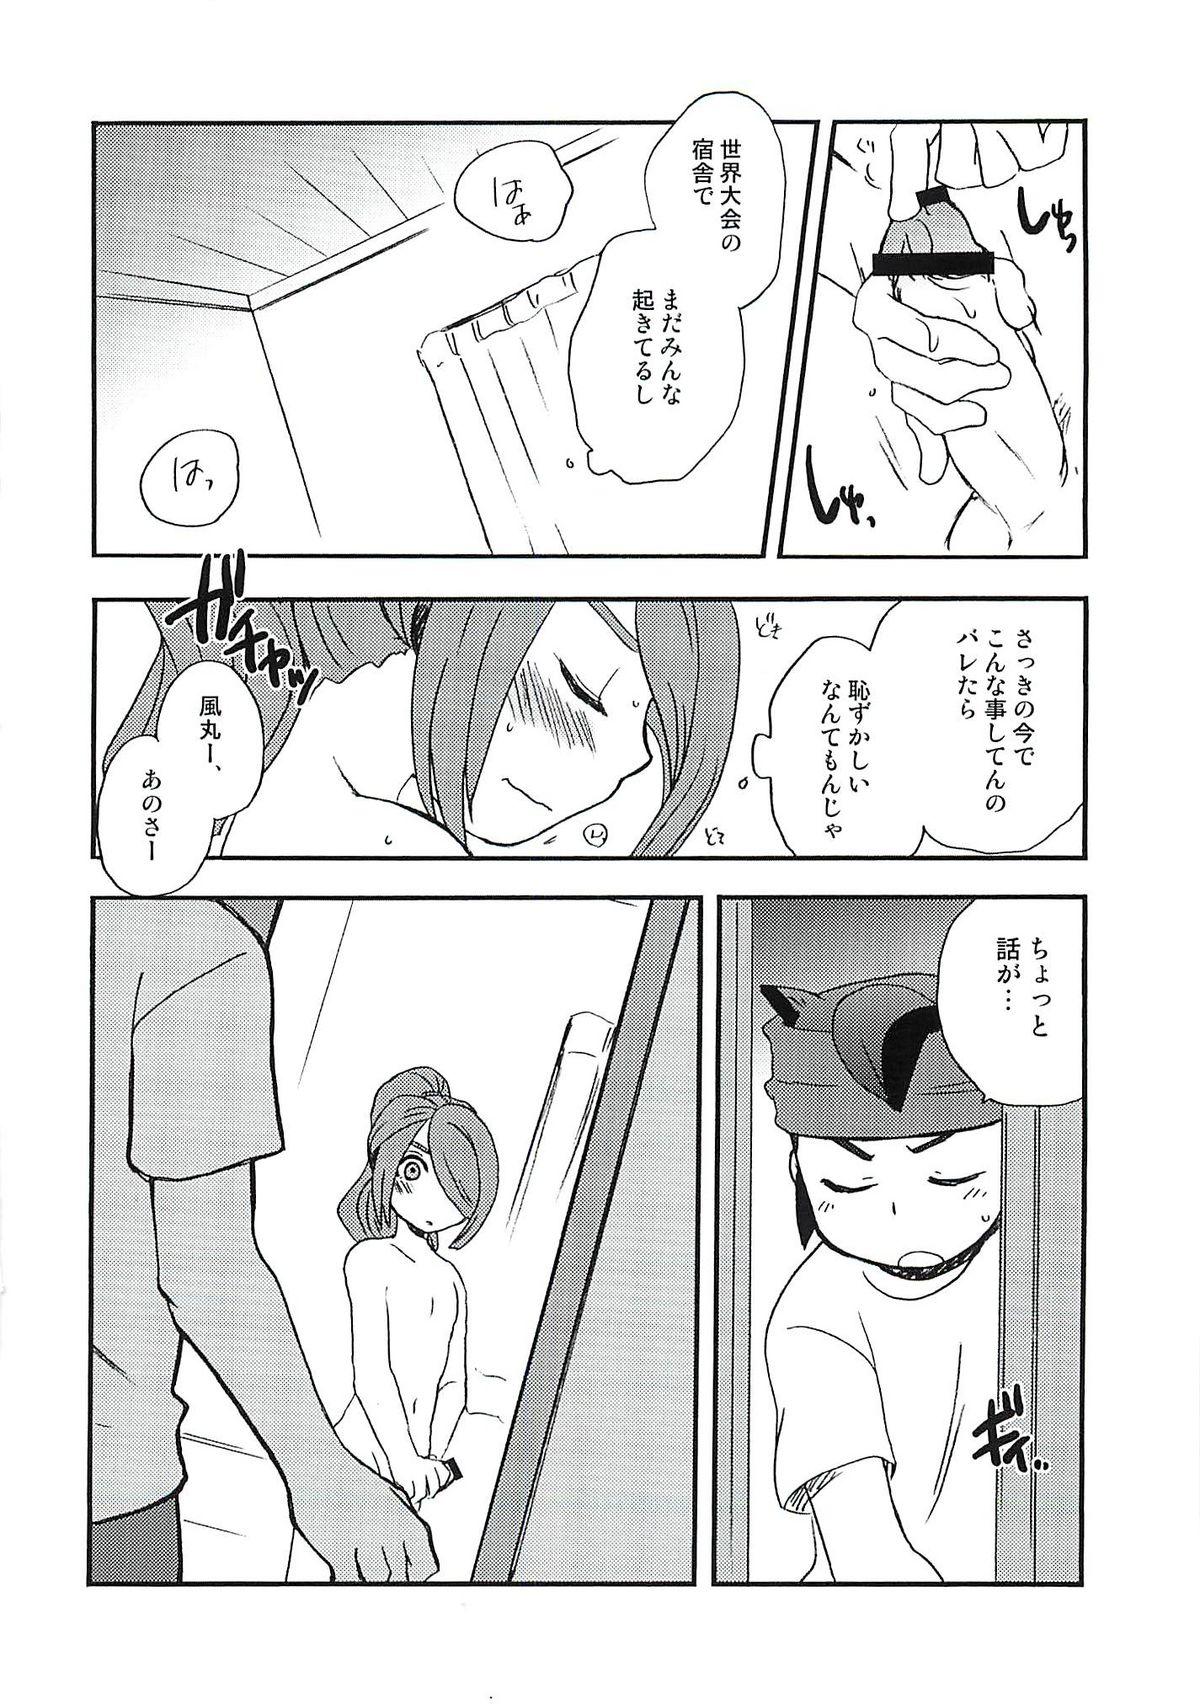 Dorm 07/21 - Inazuma eleven Officesex - Page 11